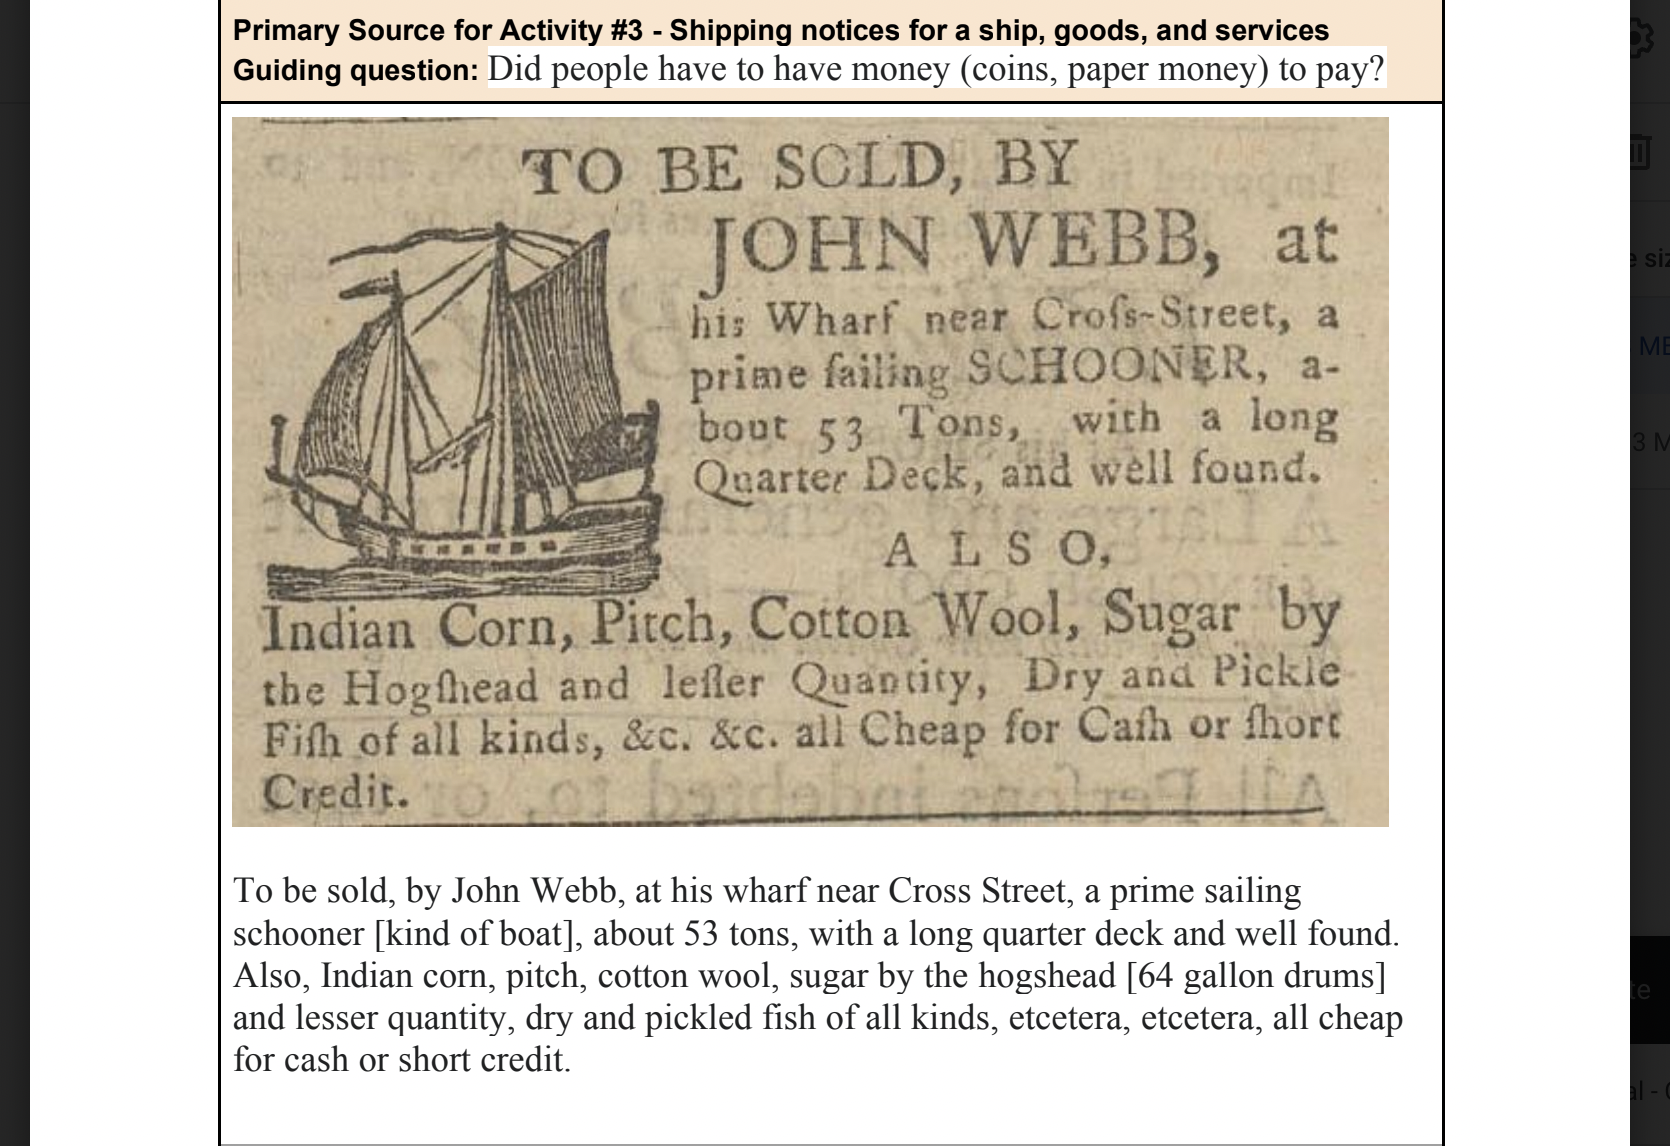 Newspaper advertisement from 1767 with woodcut of sailing ship advertising goods for sale